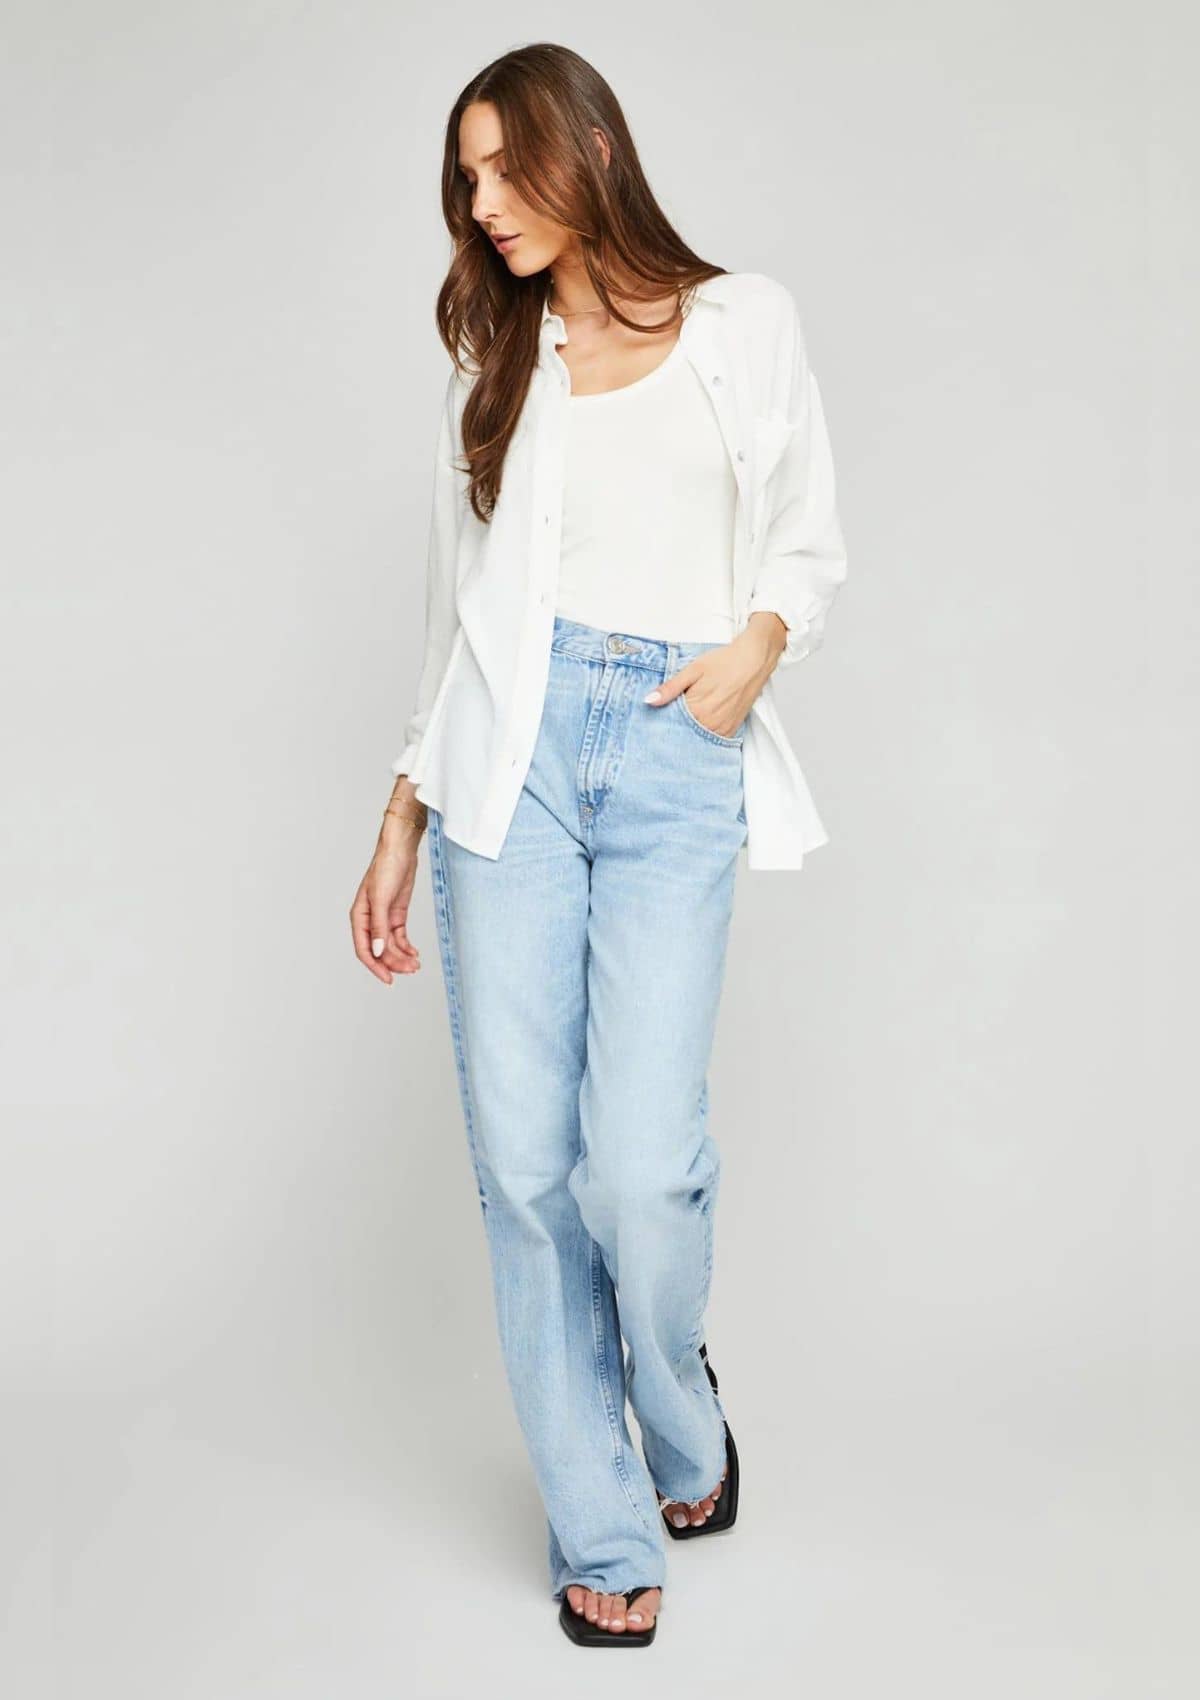 Blouses-Buttondown Shirts-Casual Tops-Ruby Jane.